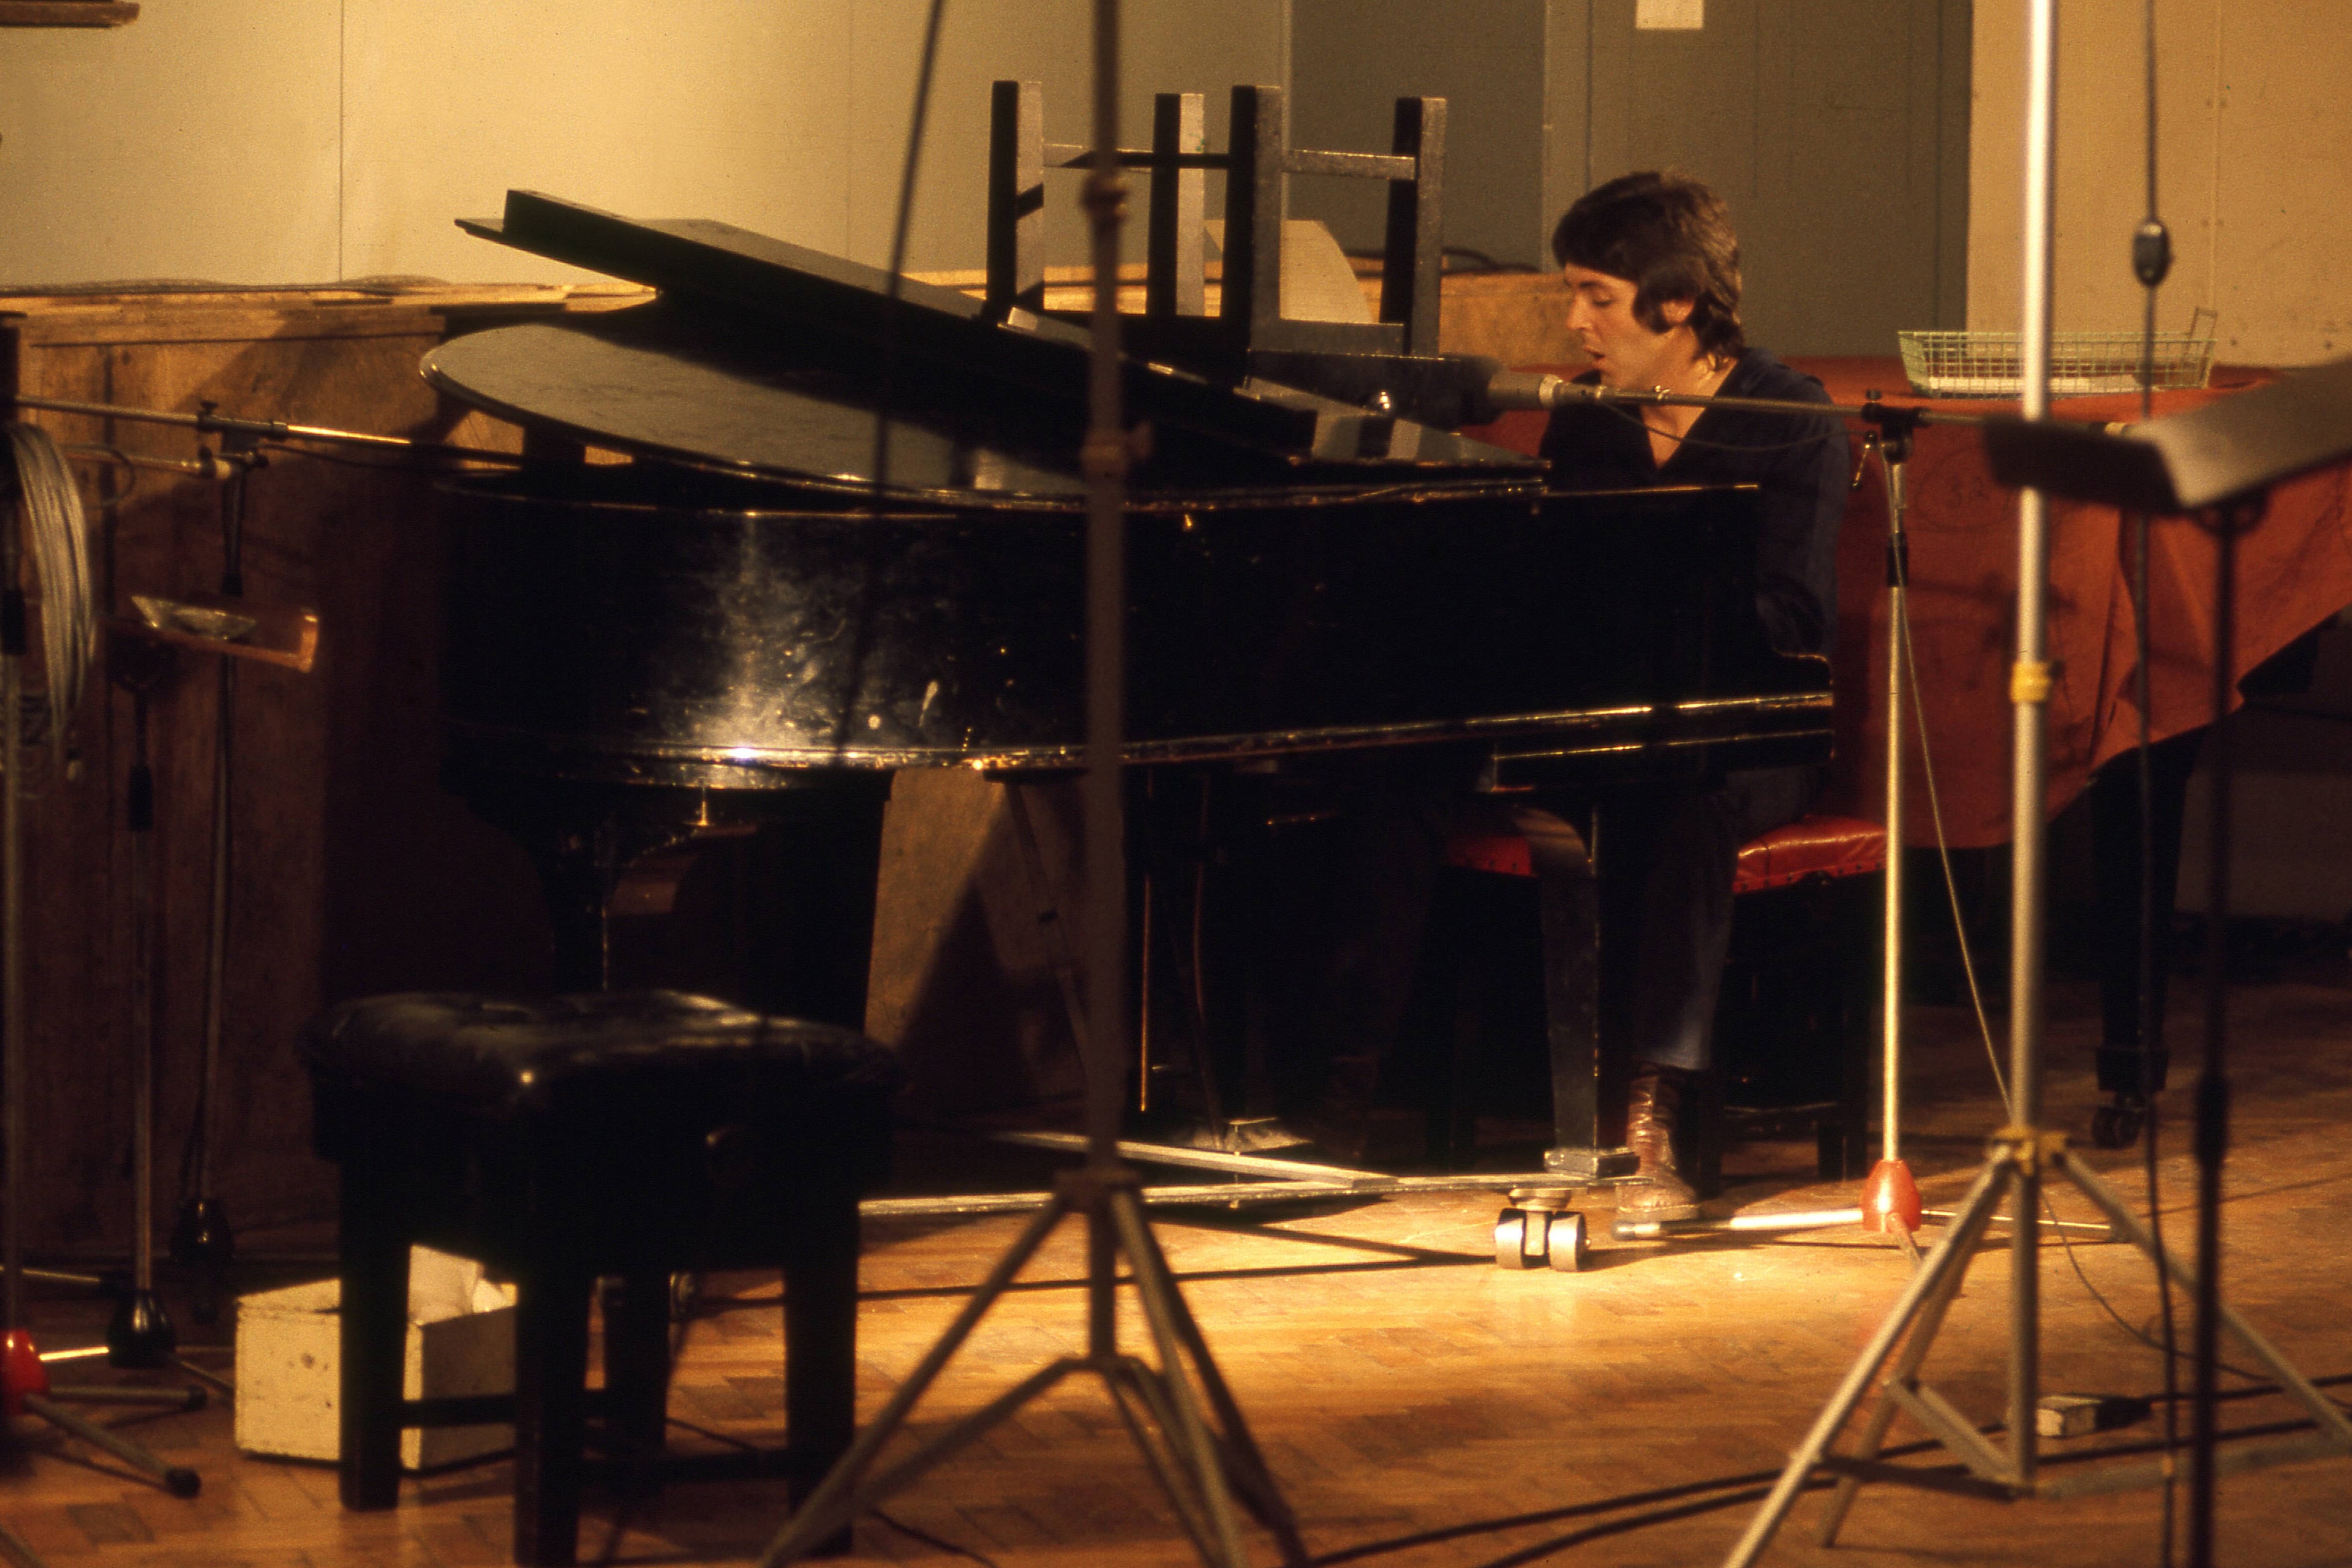 Paul recording 'One Hand Clapping' at Abbey Road Studios, 1974